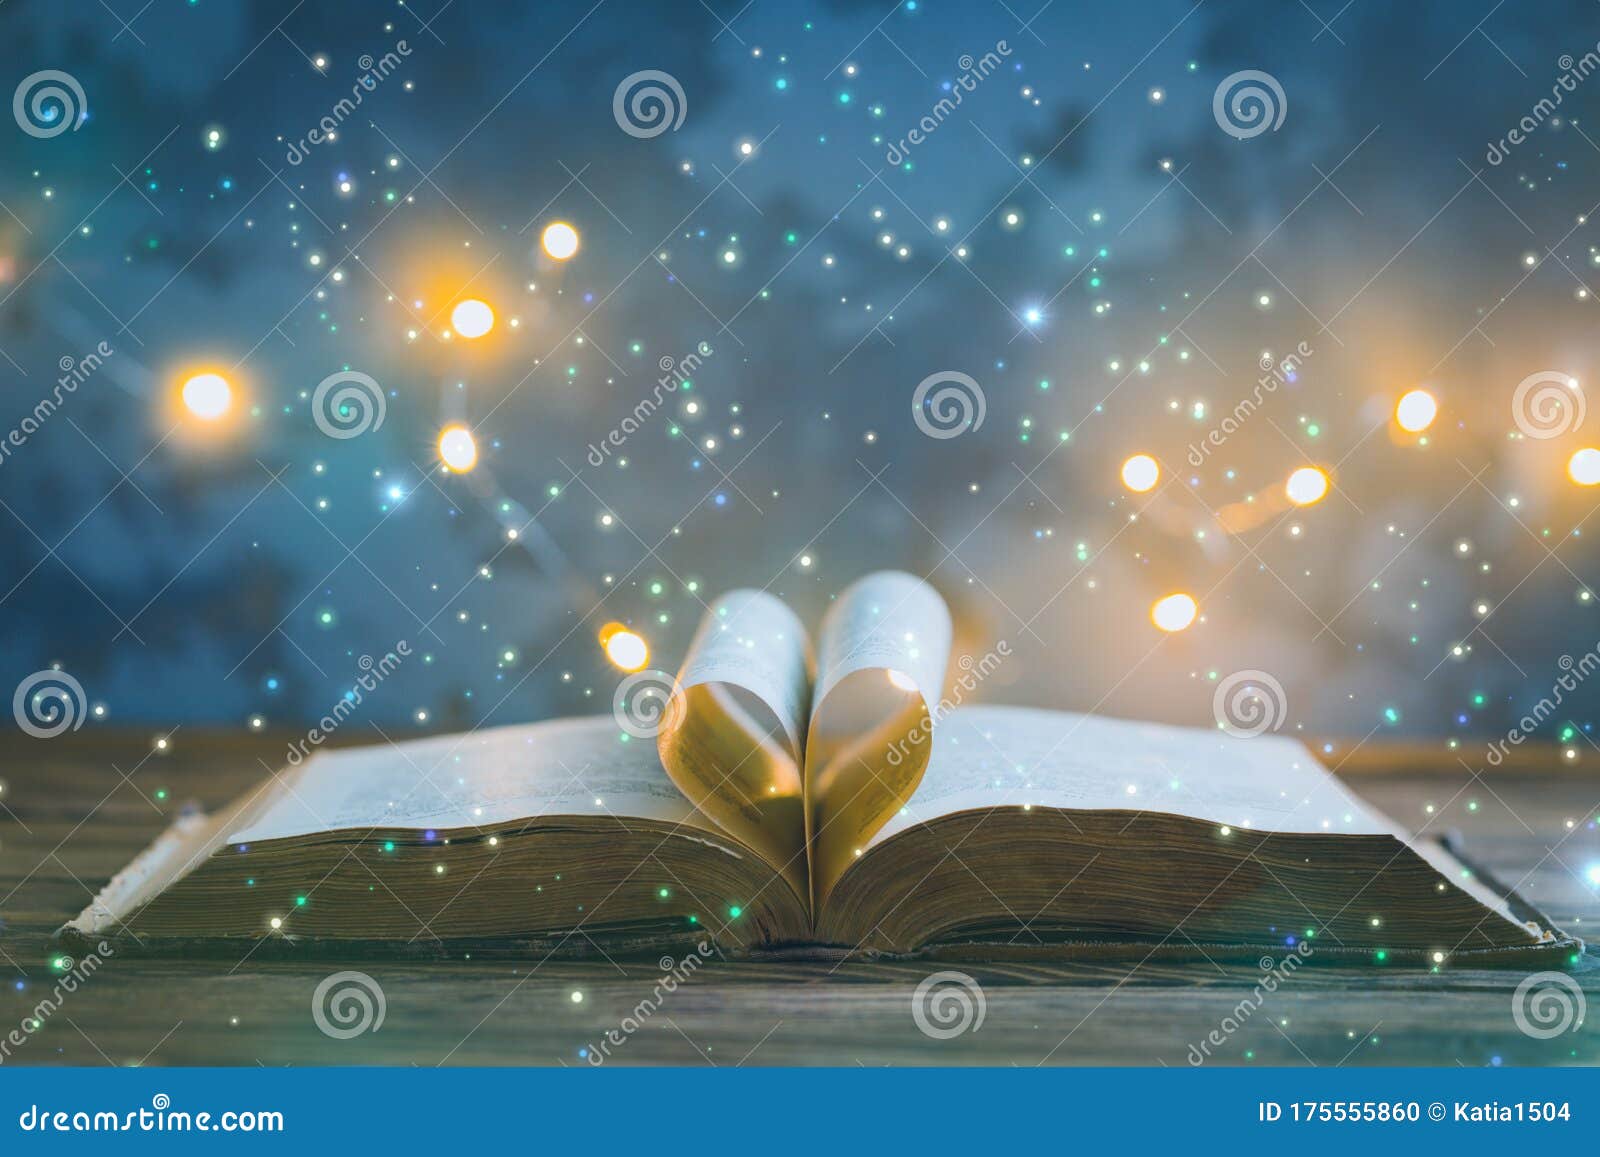 501,379 Book Paper Stock Photos - Free & Royalty-Free Stock Photos from  Dreamstime